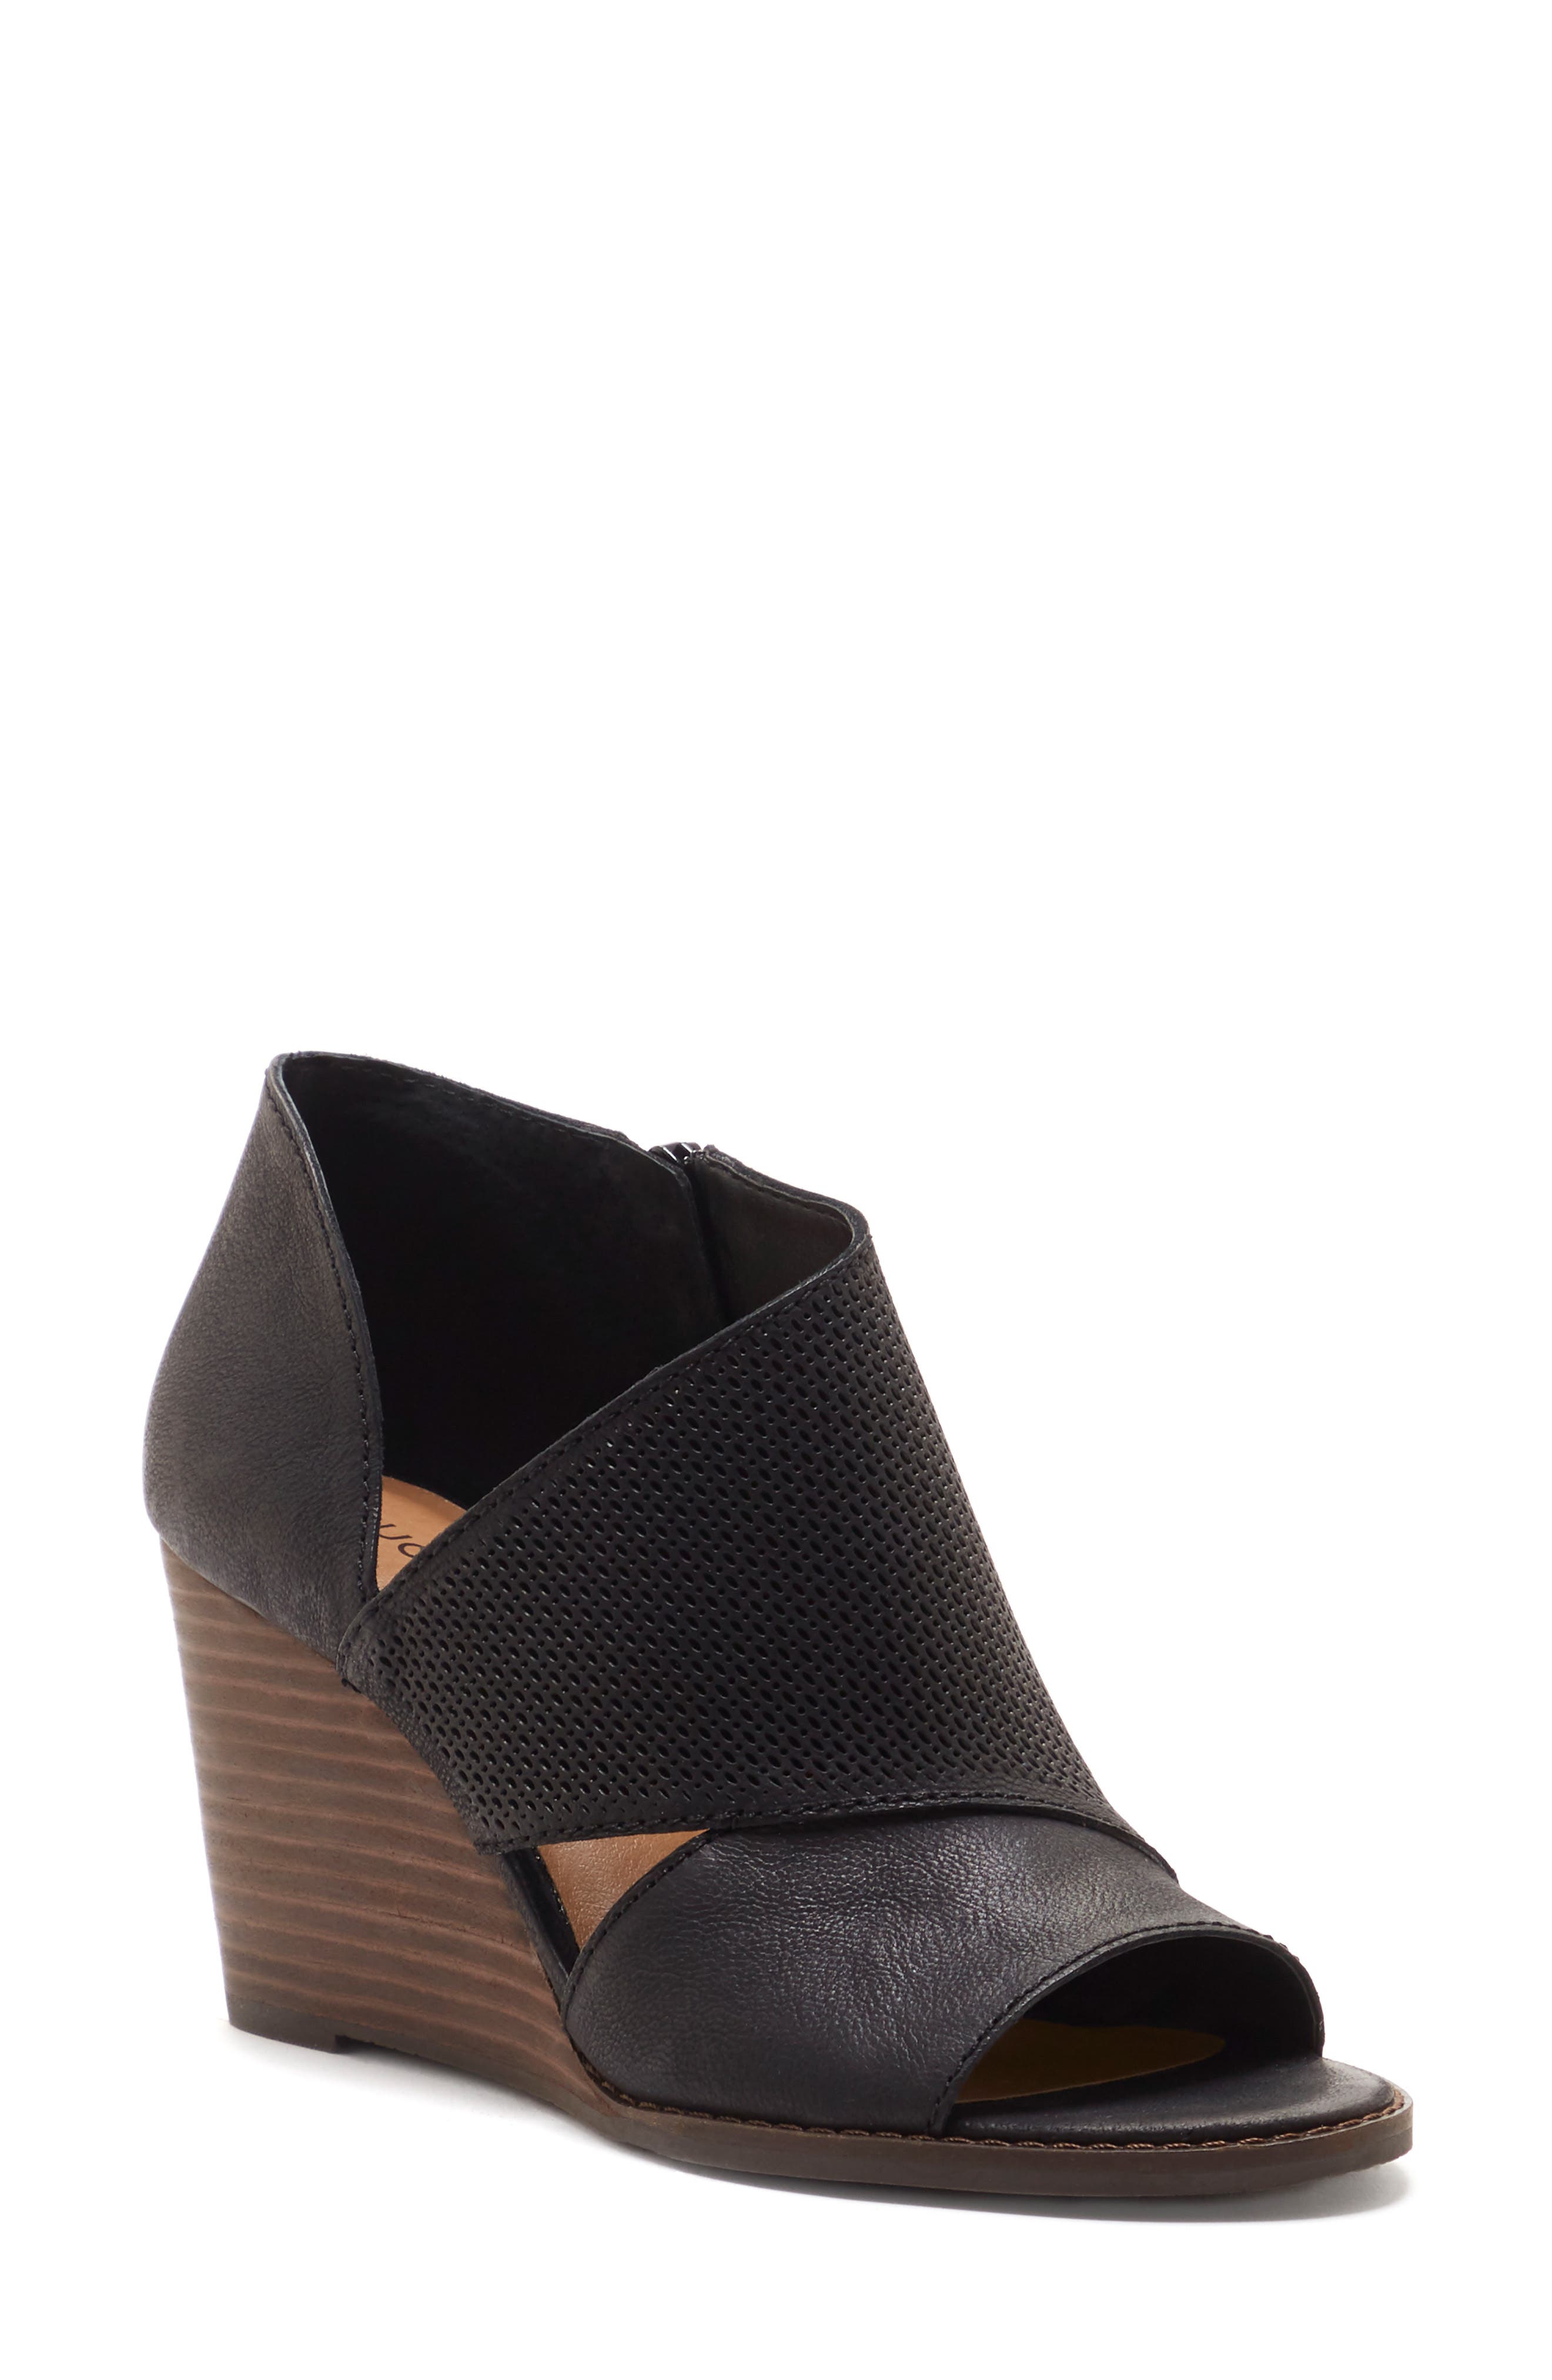 lucky brand perforated peep toe booties